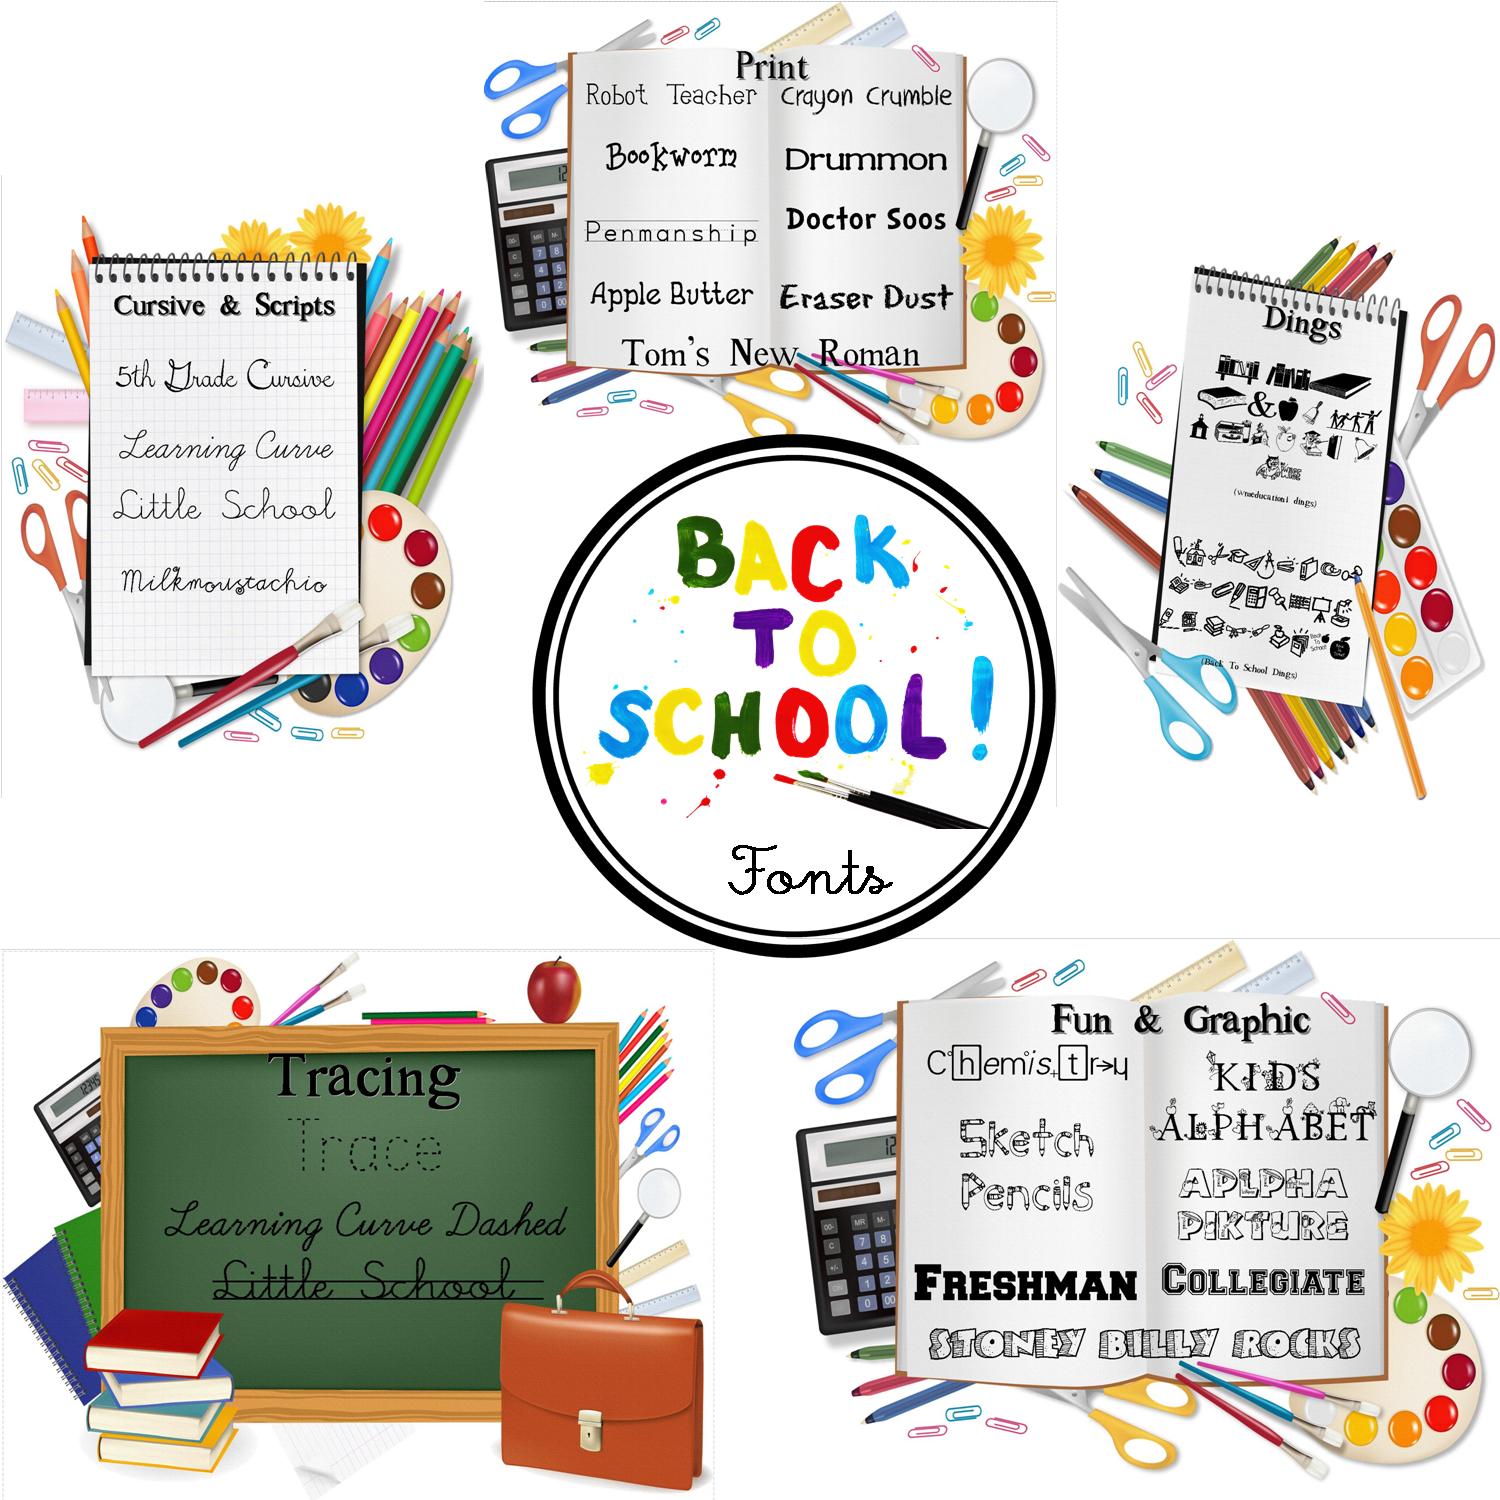 25 FREE Back to School Fonts